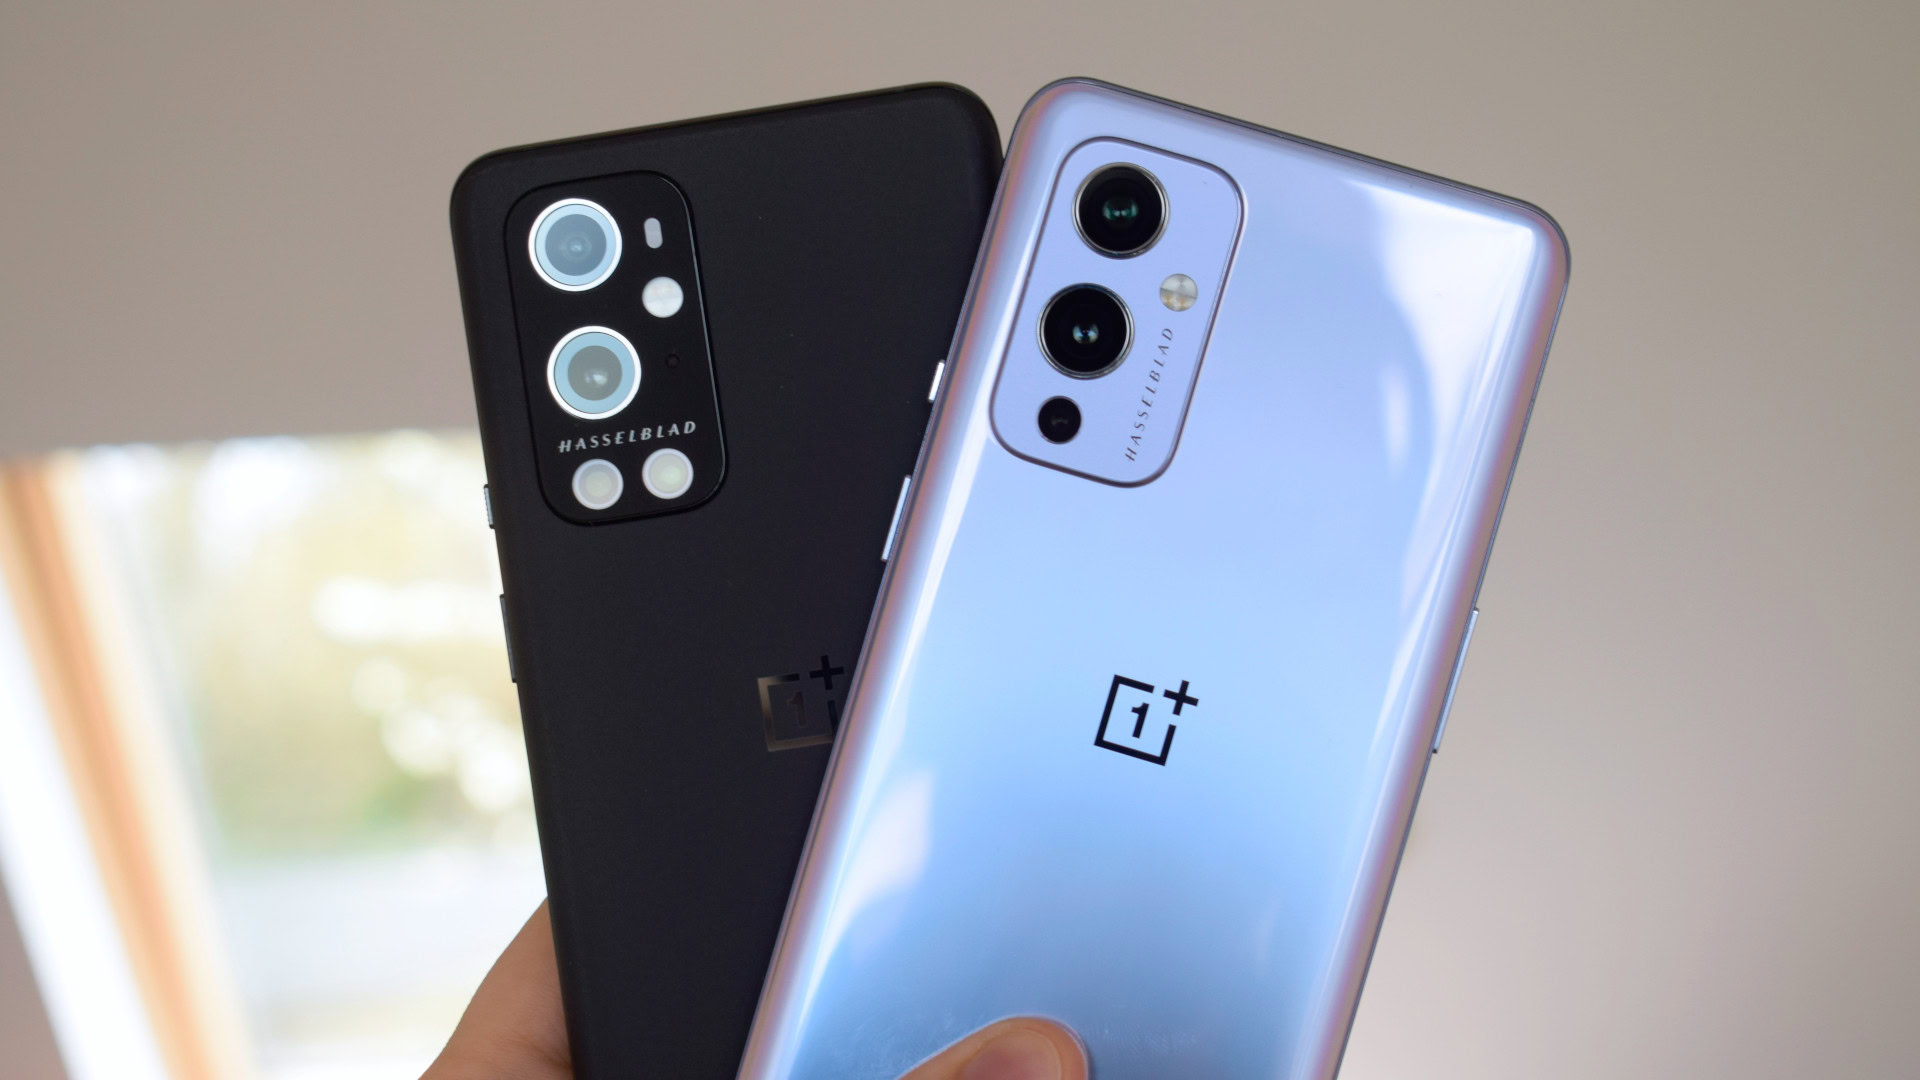 The backs of the OnePlus 9 Pro and OnePlus 9 side by side.